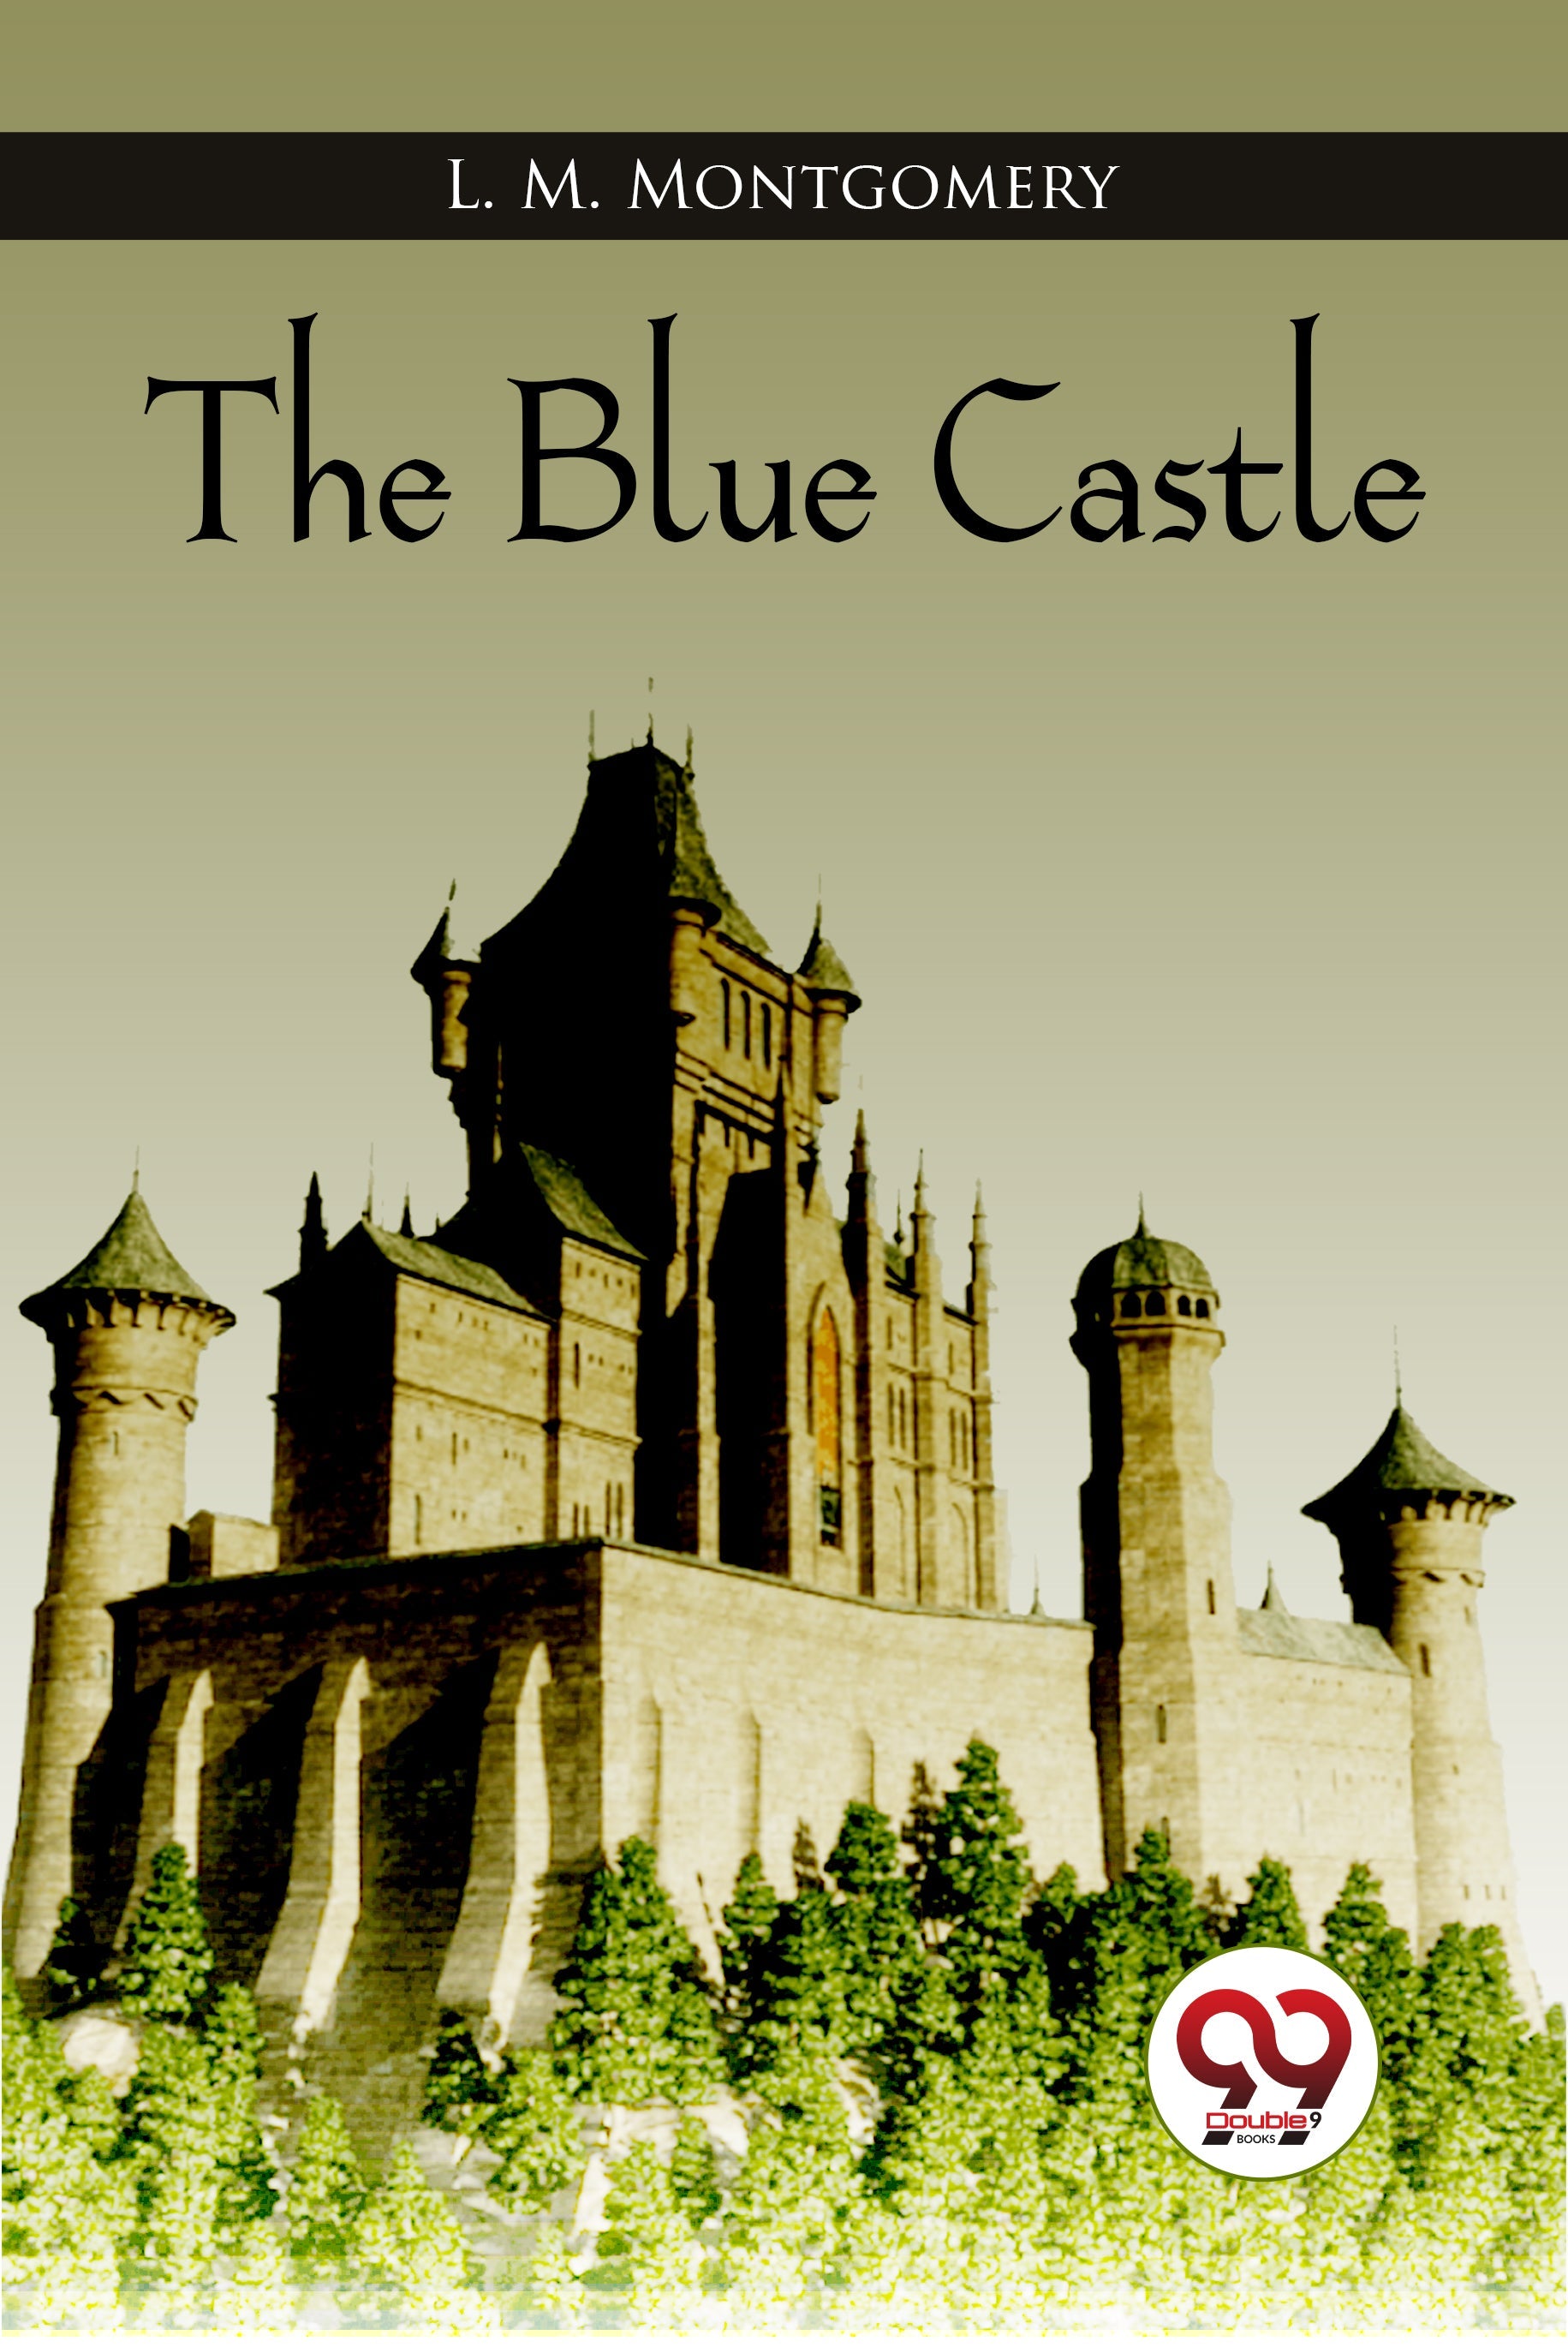 The Blue Castle by L. M. Montgomery published by Double9 Books